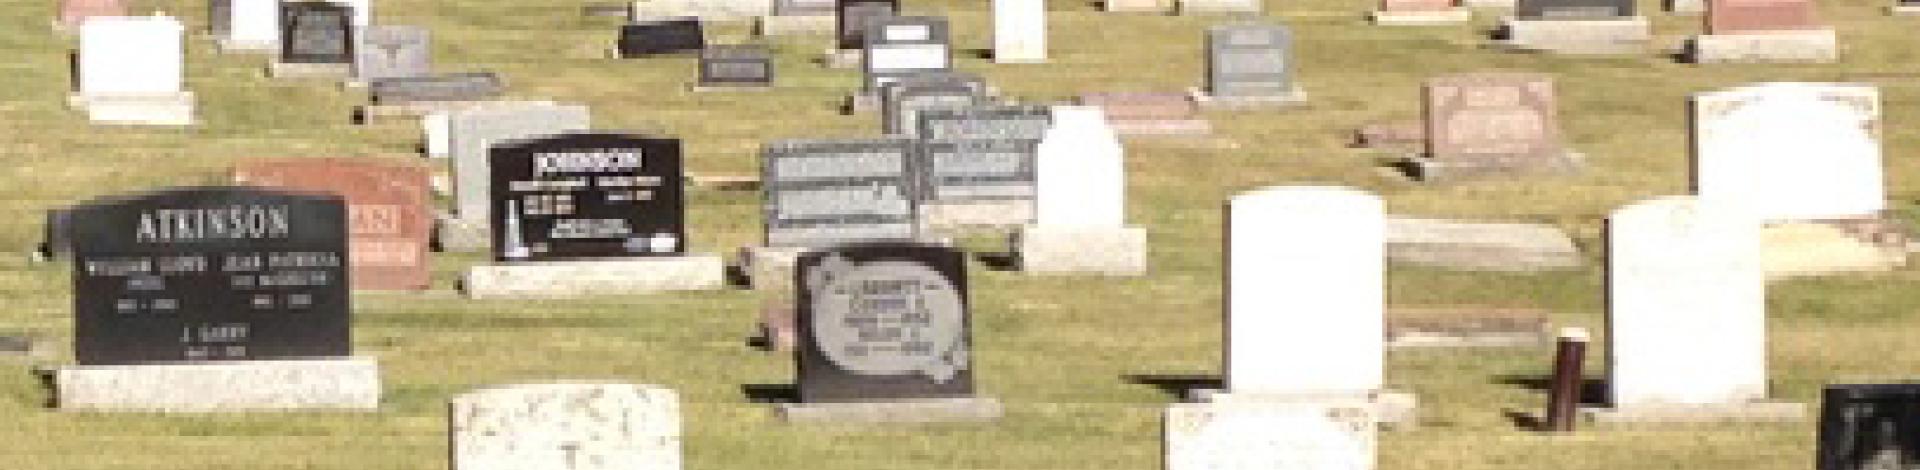 A photo of gravestones in a cemetery.